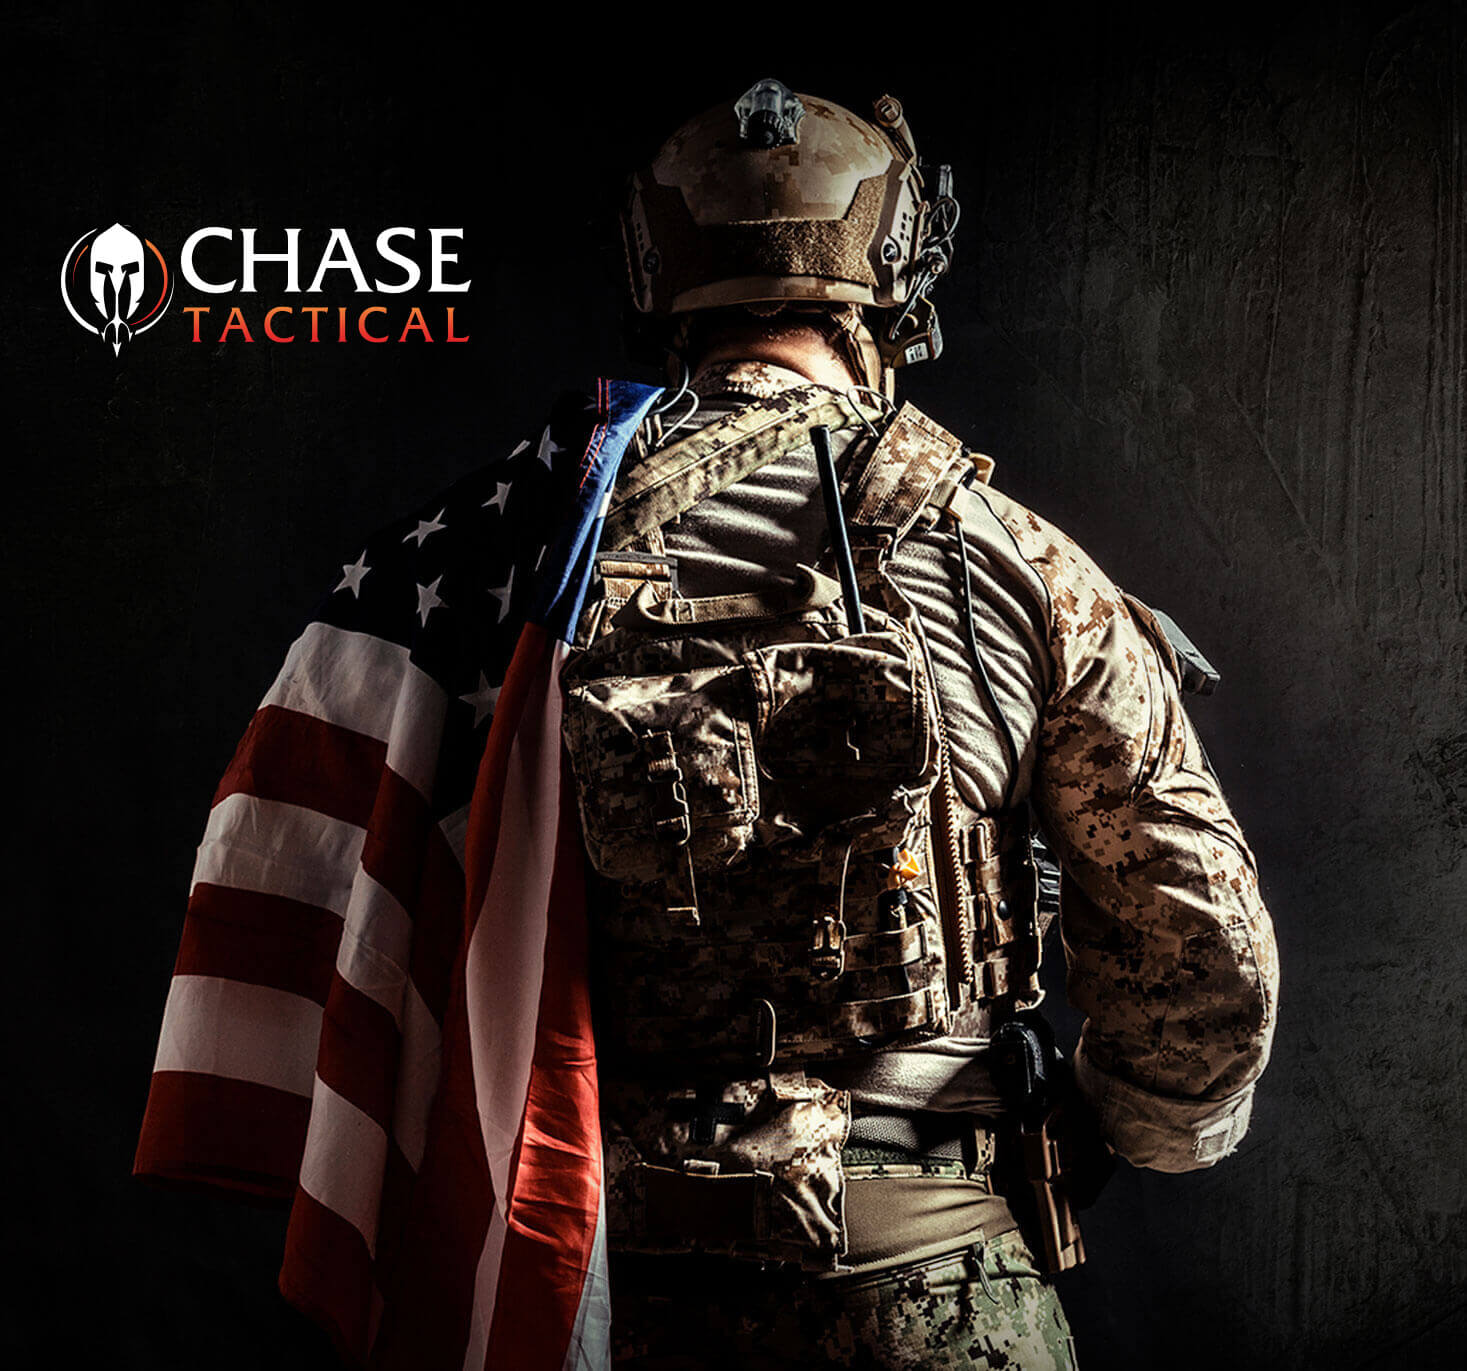 Chase Tactical